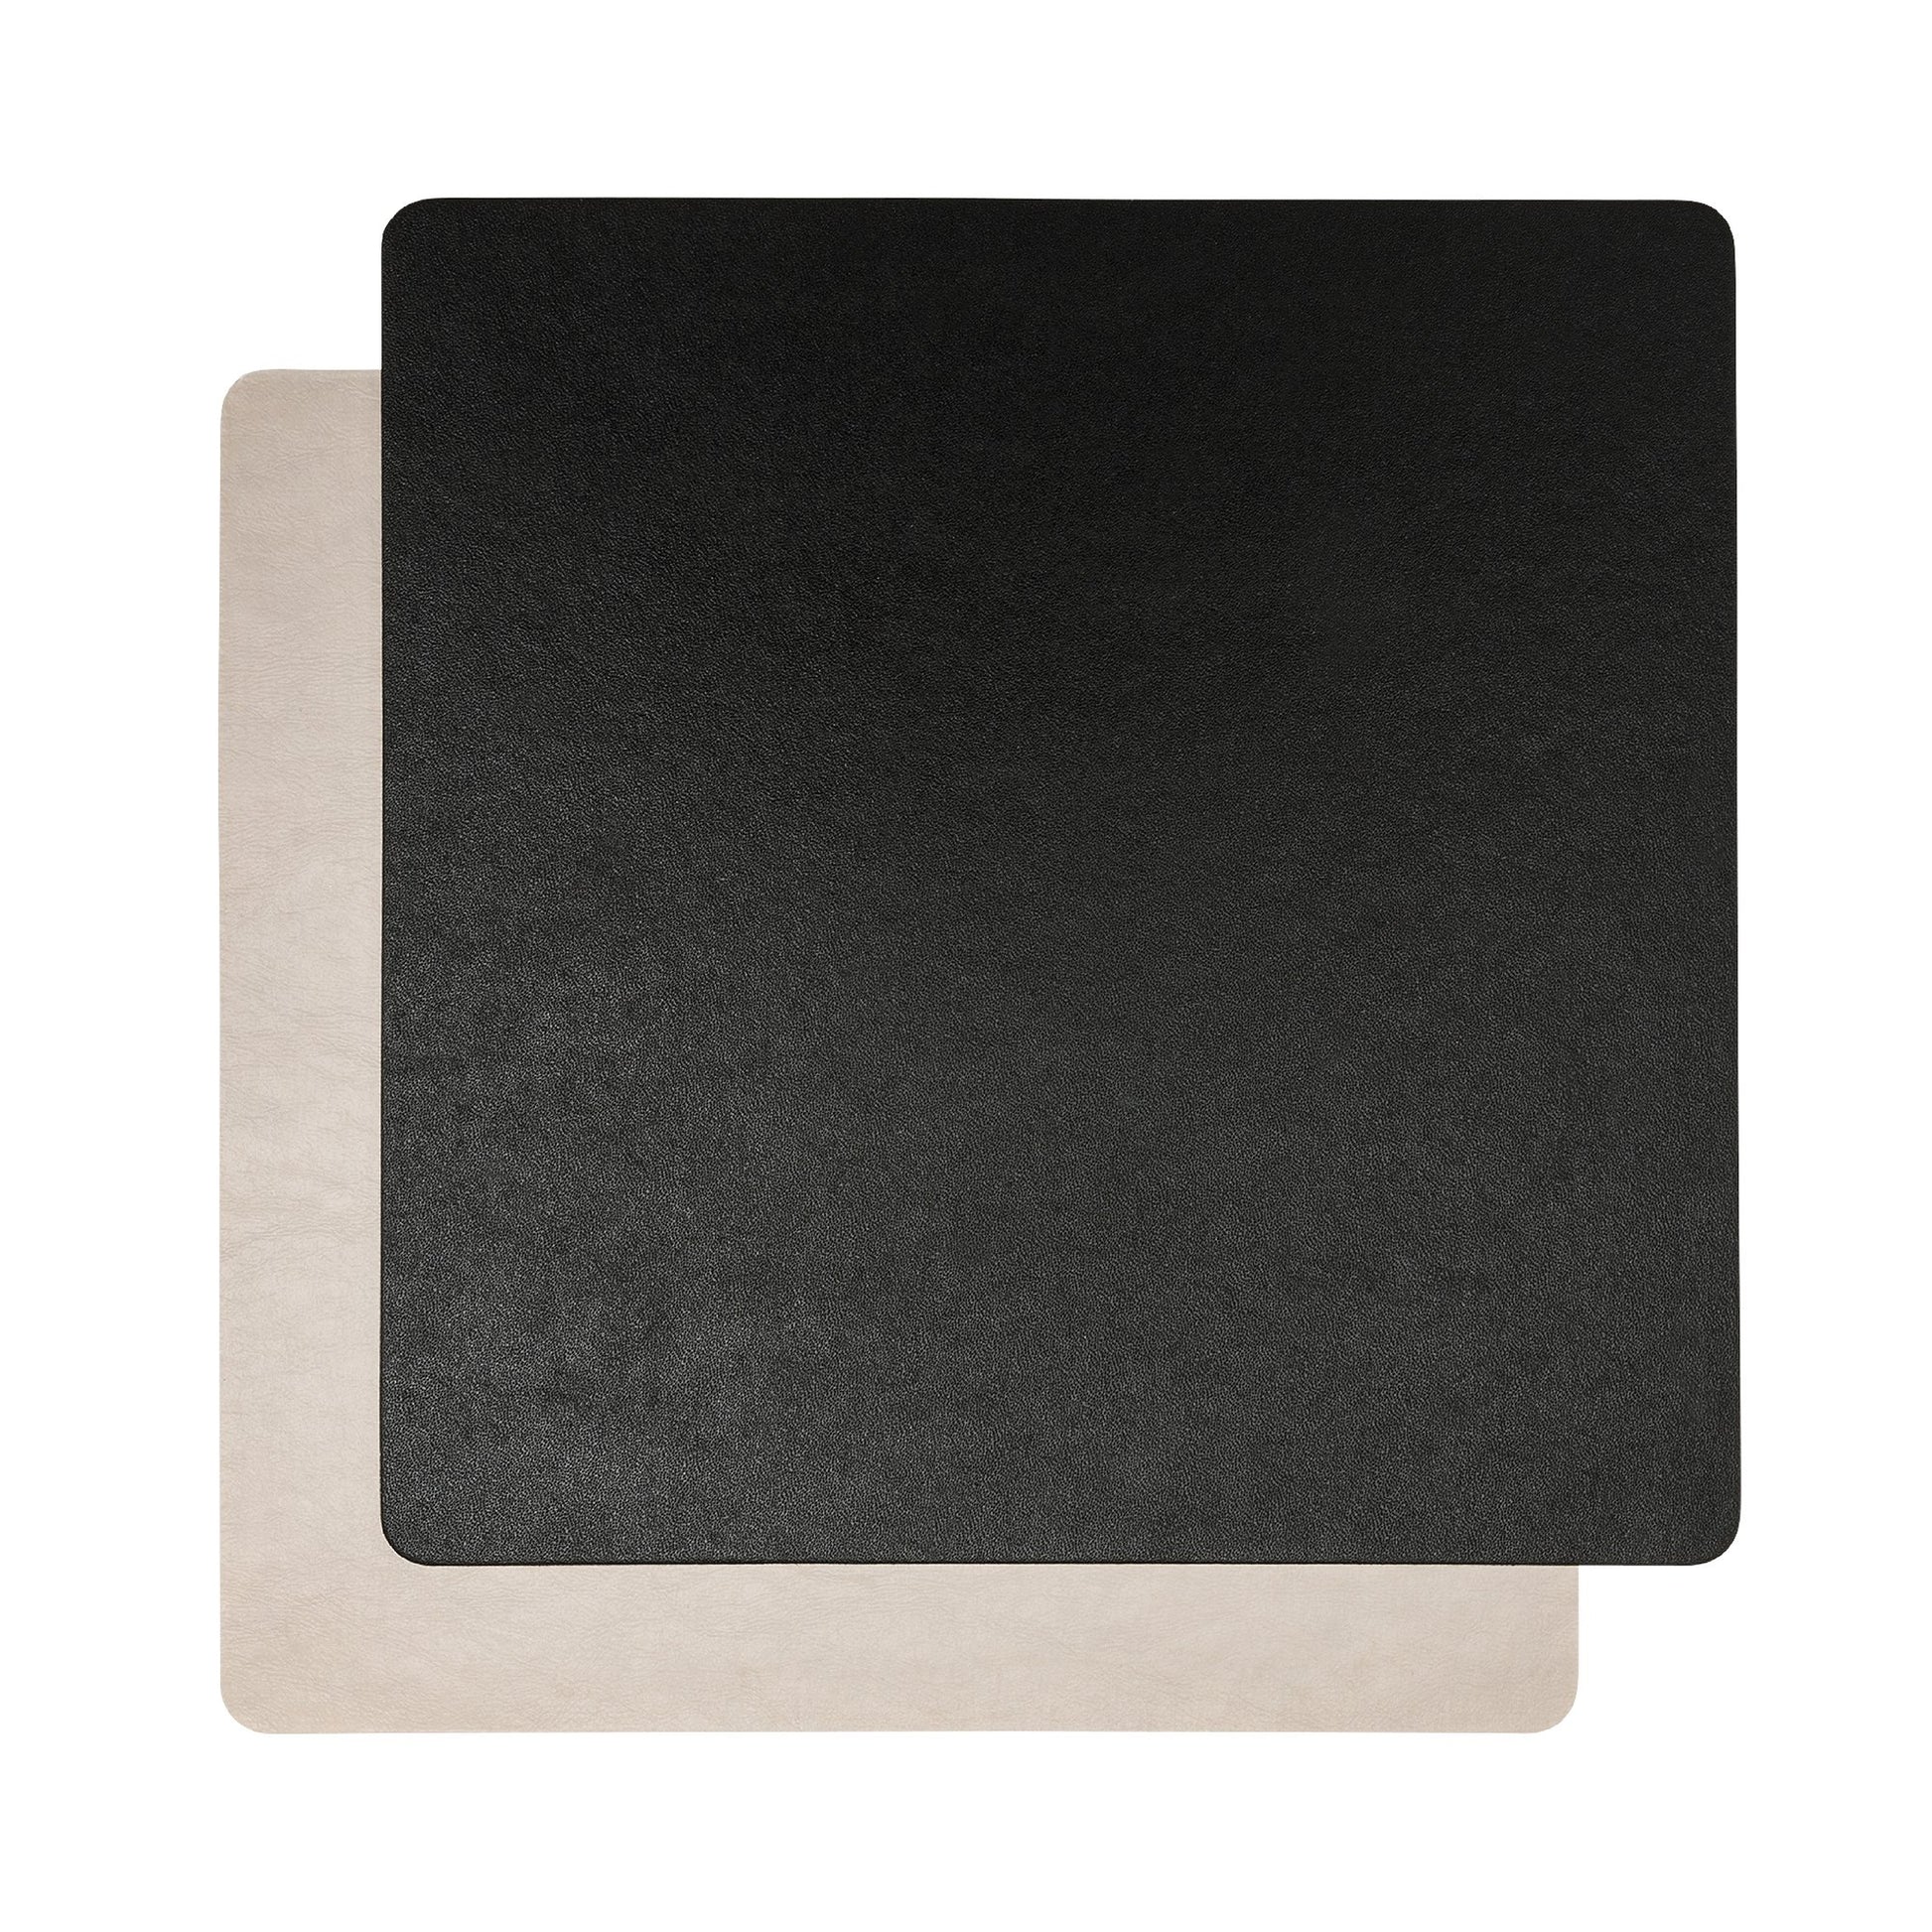 Two square washable paper placemats are shown one on top of the other. The one in the foreground is black and the one at the rear is beige.